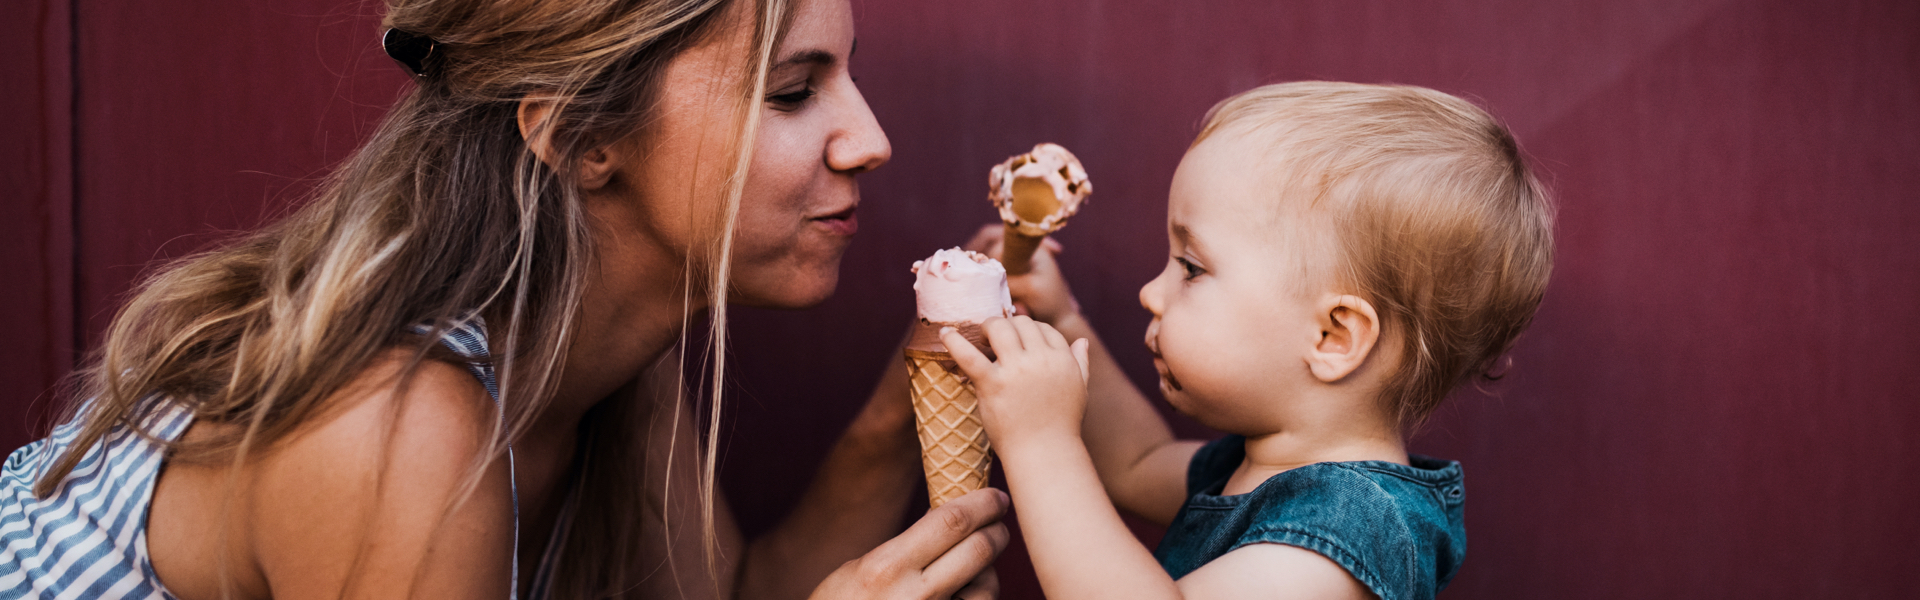 A woman is sharing an ice cream cone with a baby.